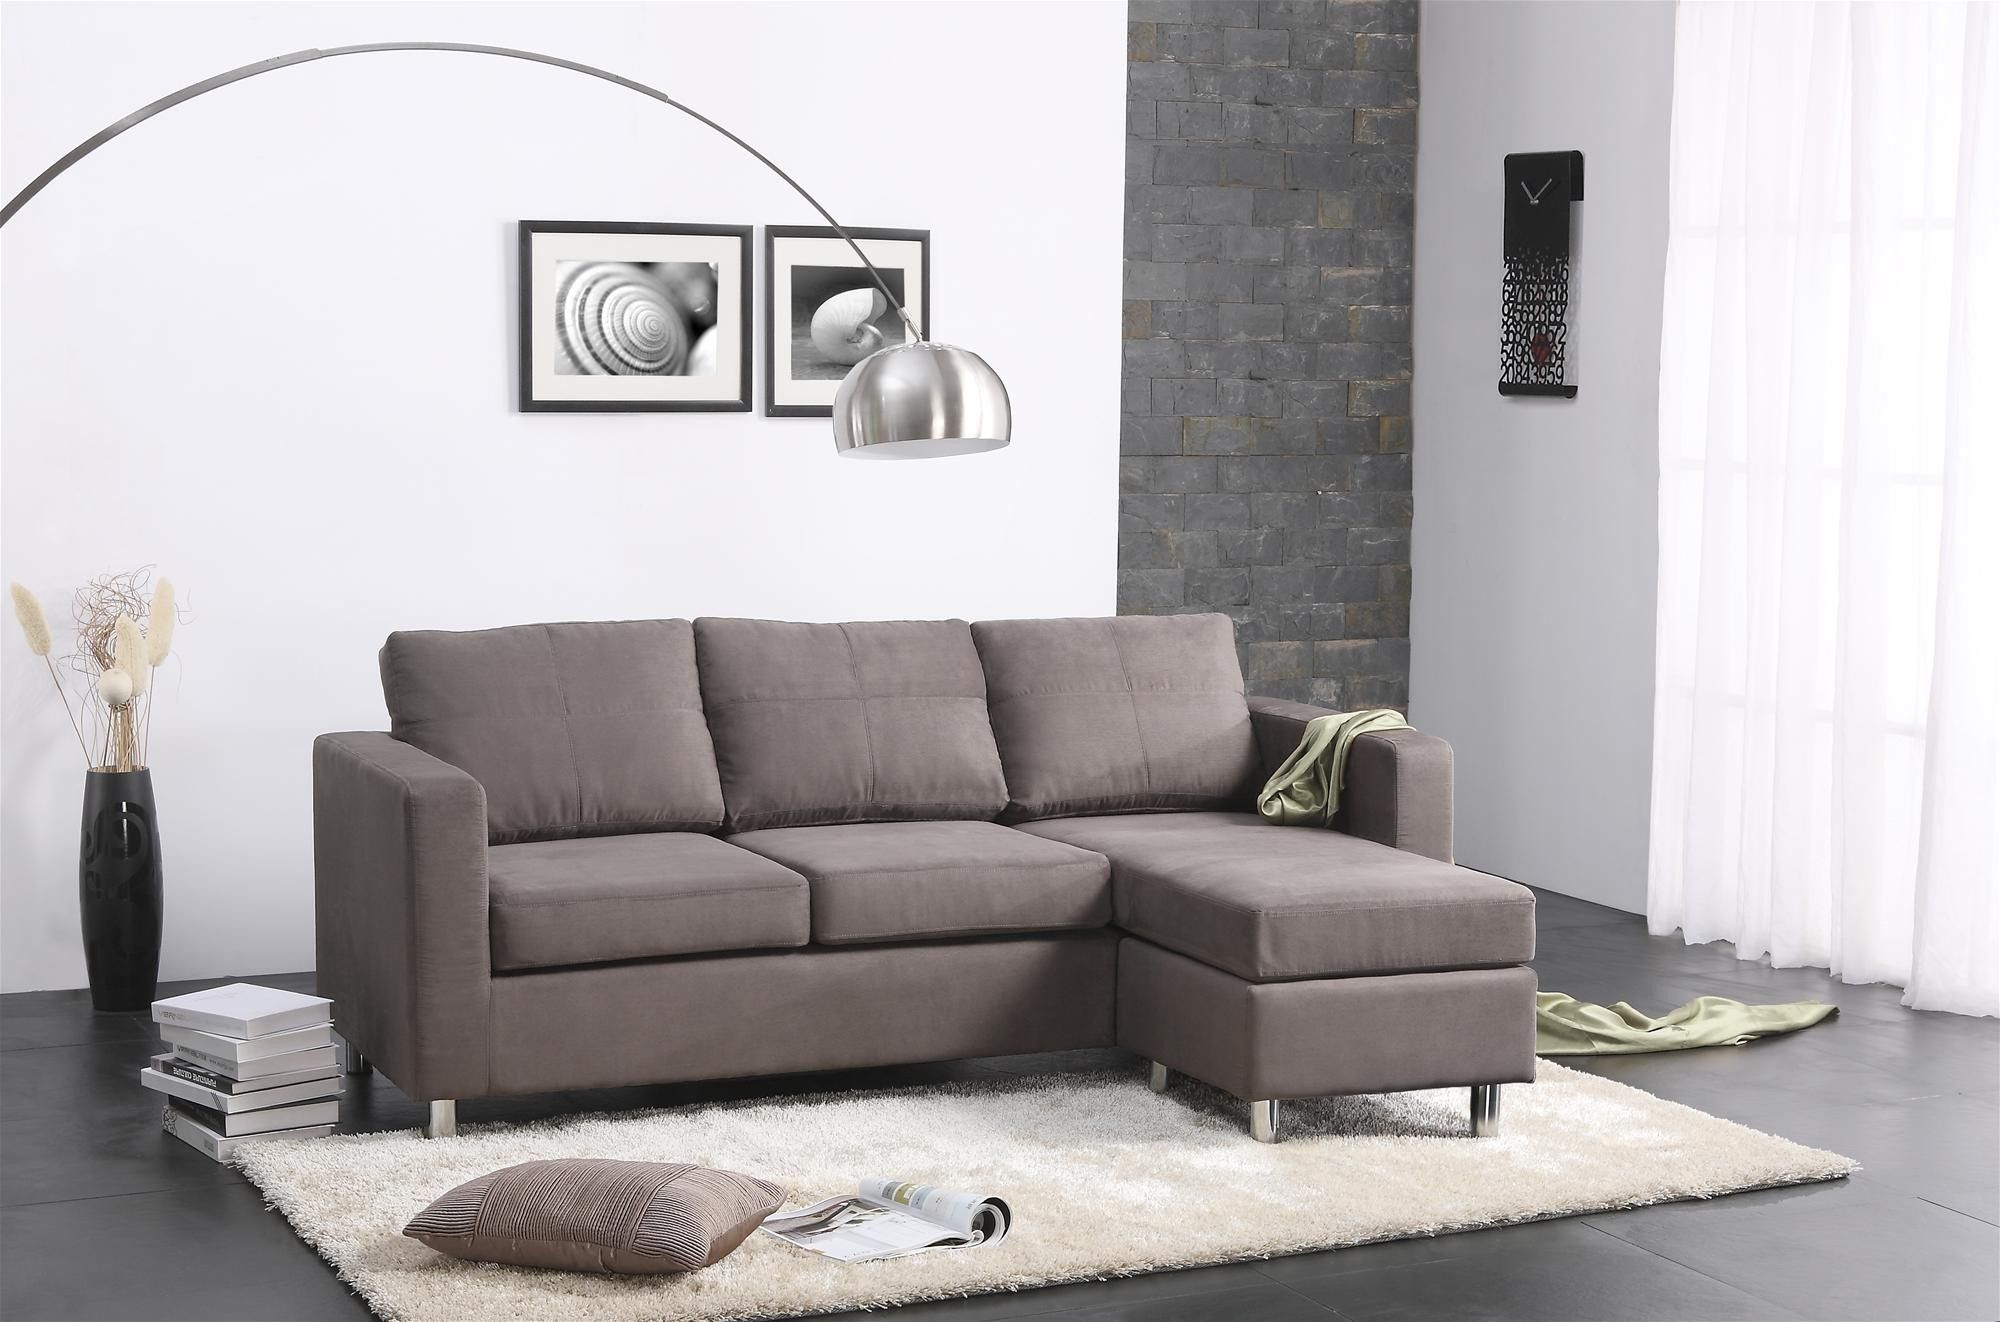 Popular High Quality Sectional Sofas 85 With Additional Abson With Abbyson Sectional Sofa (View 10 of 12)